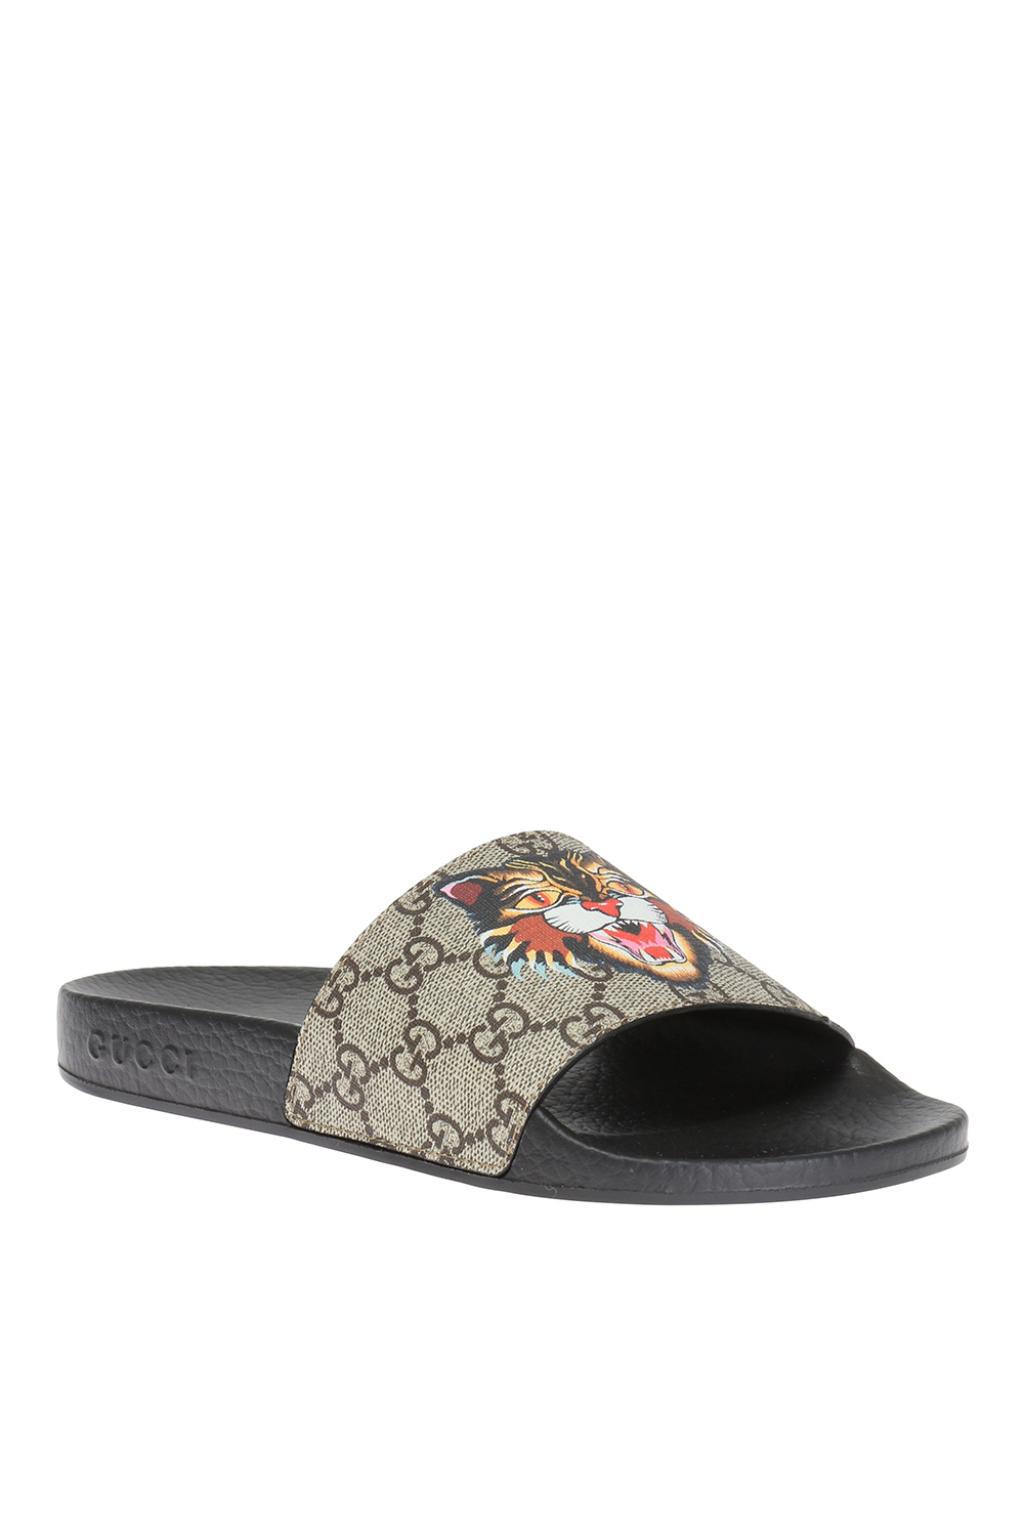 gucci lion slippers, OFF 78%,www 